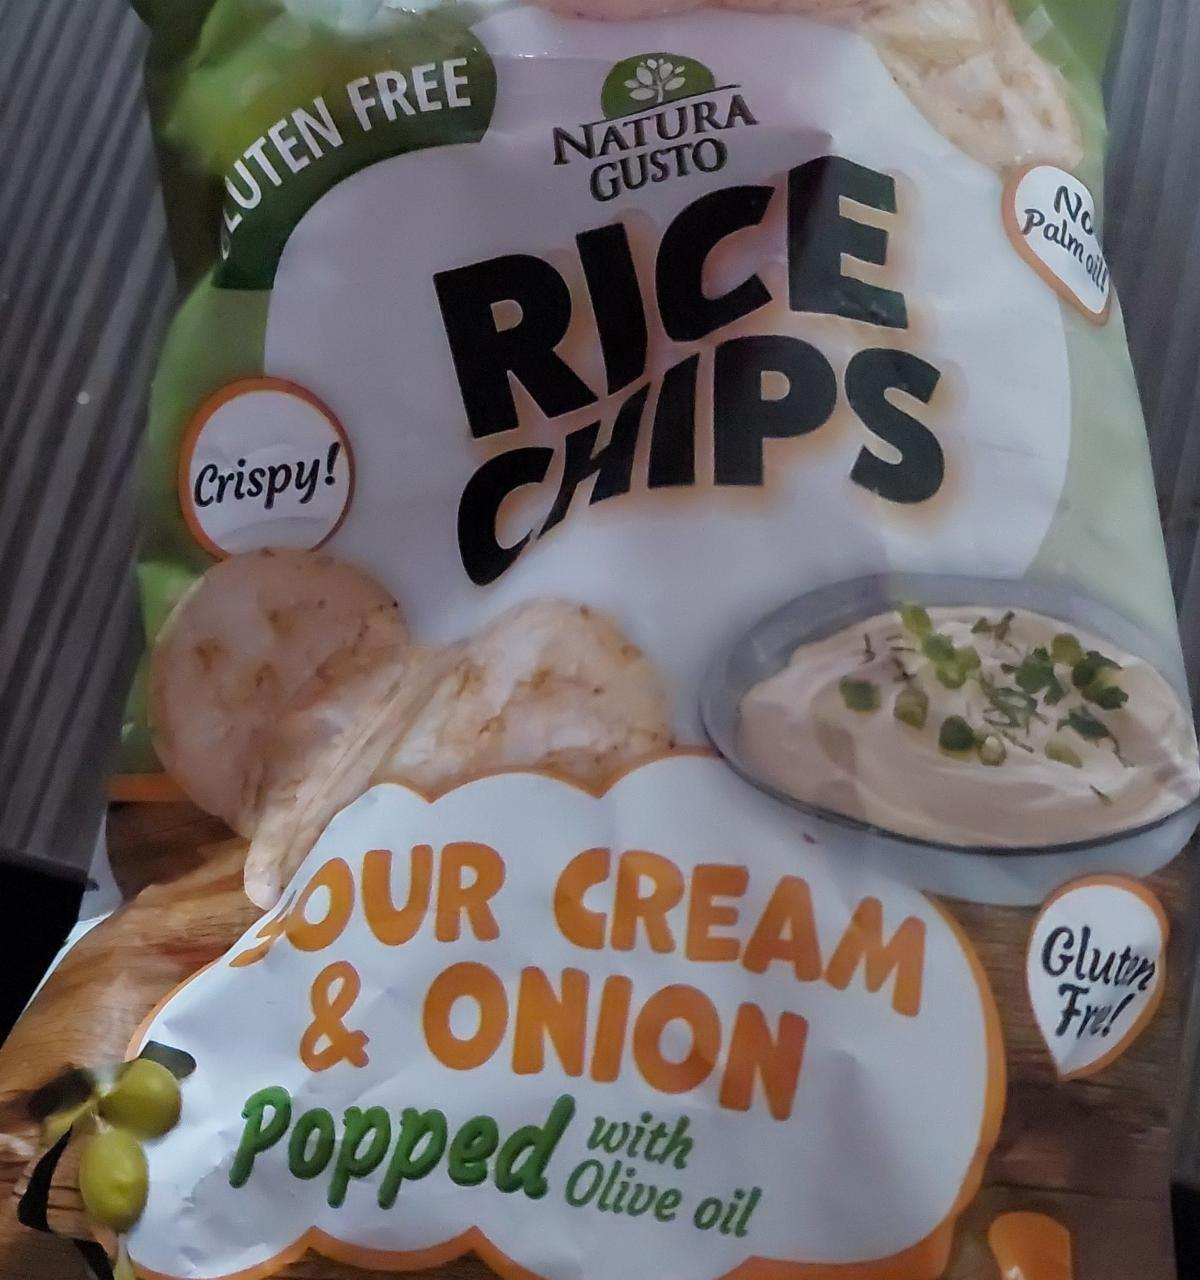 Fotografie - Rice chips Sour cream & onion popped with olive oil Natura Gusto